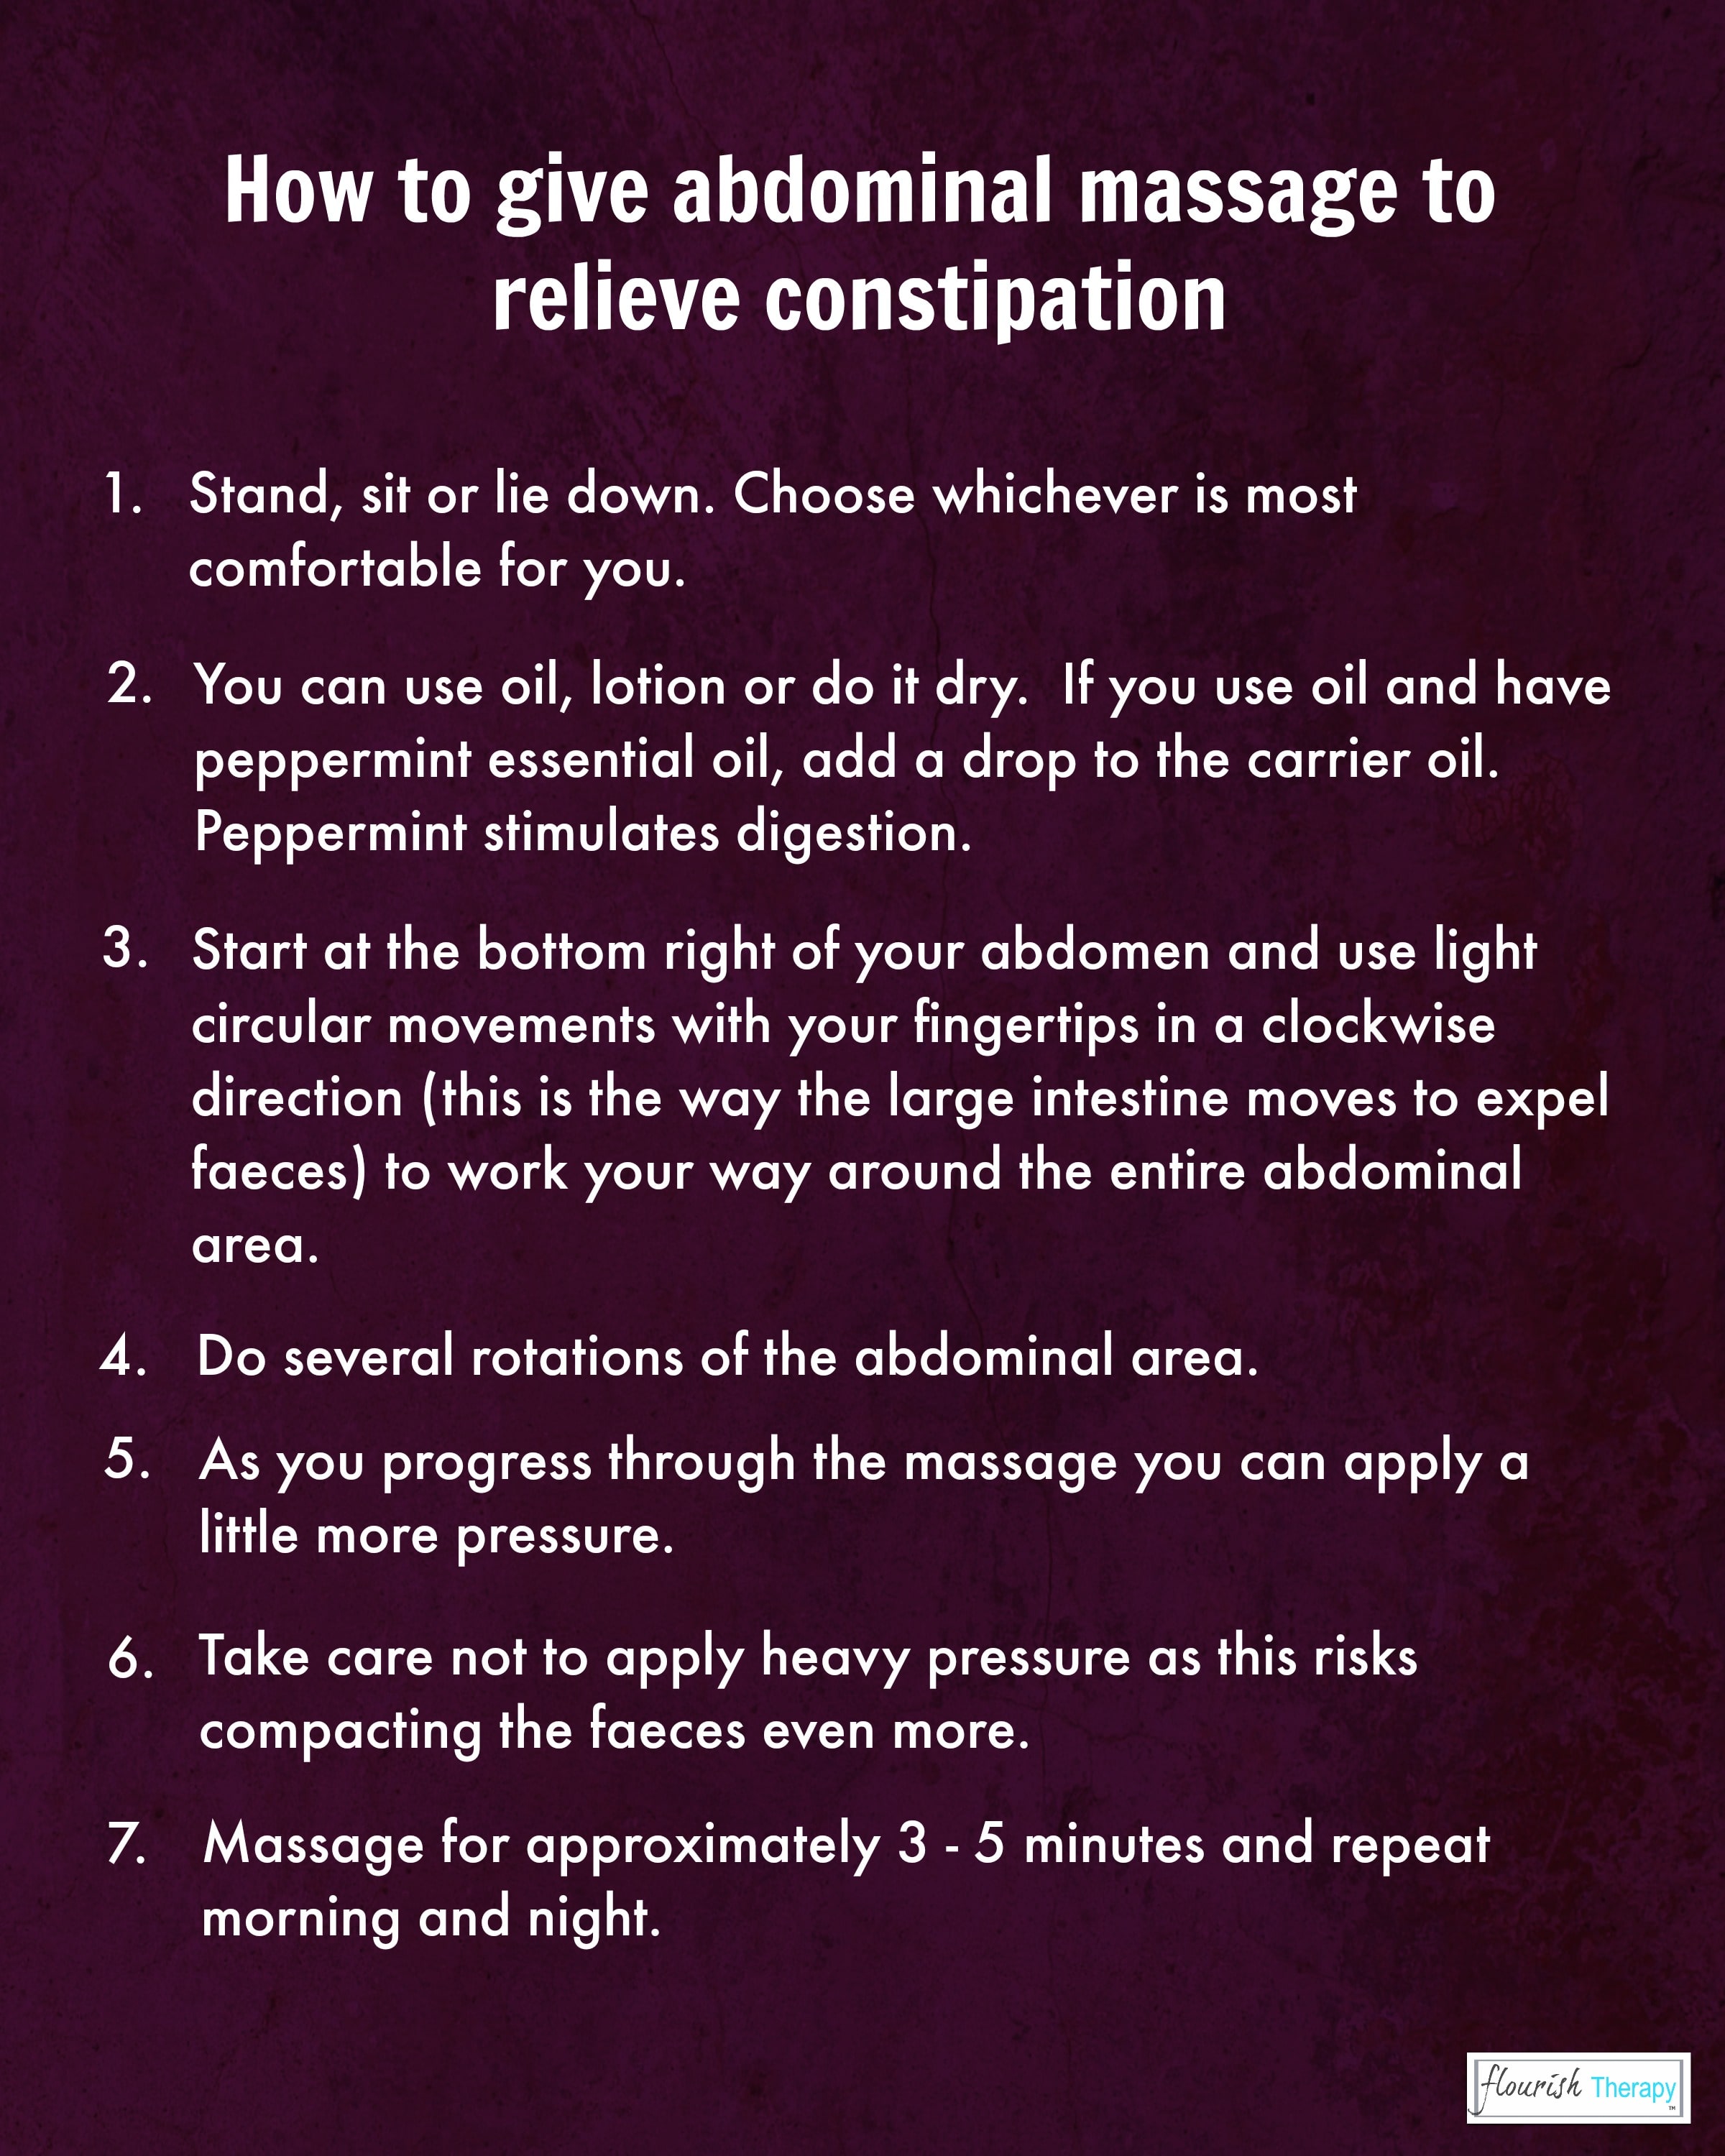 Abdominal massage for constipation